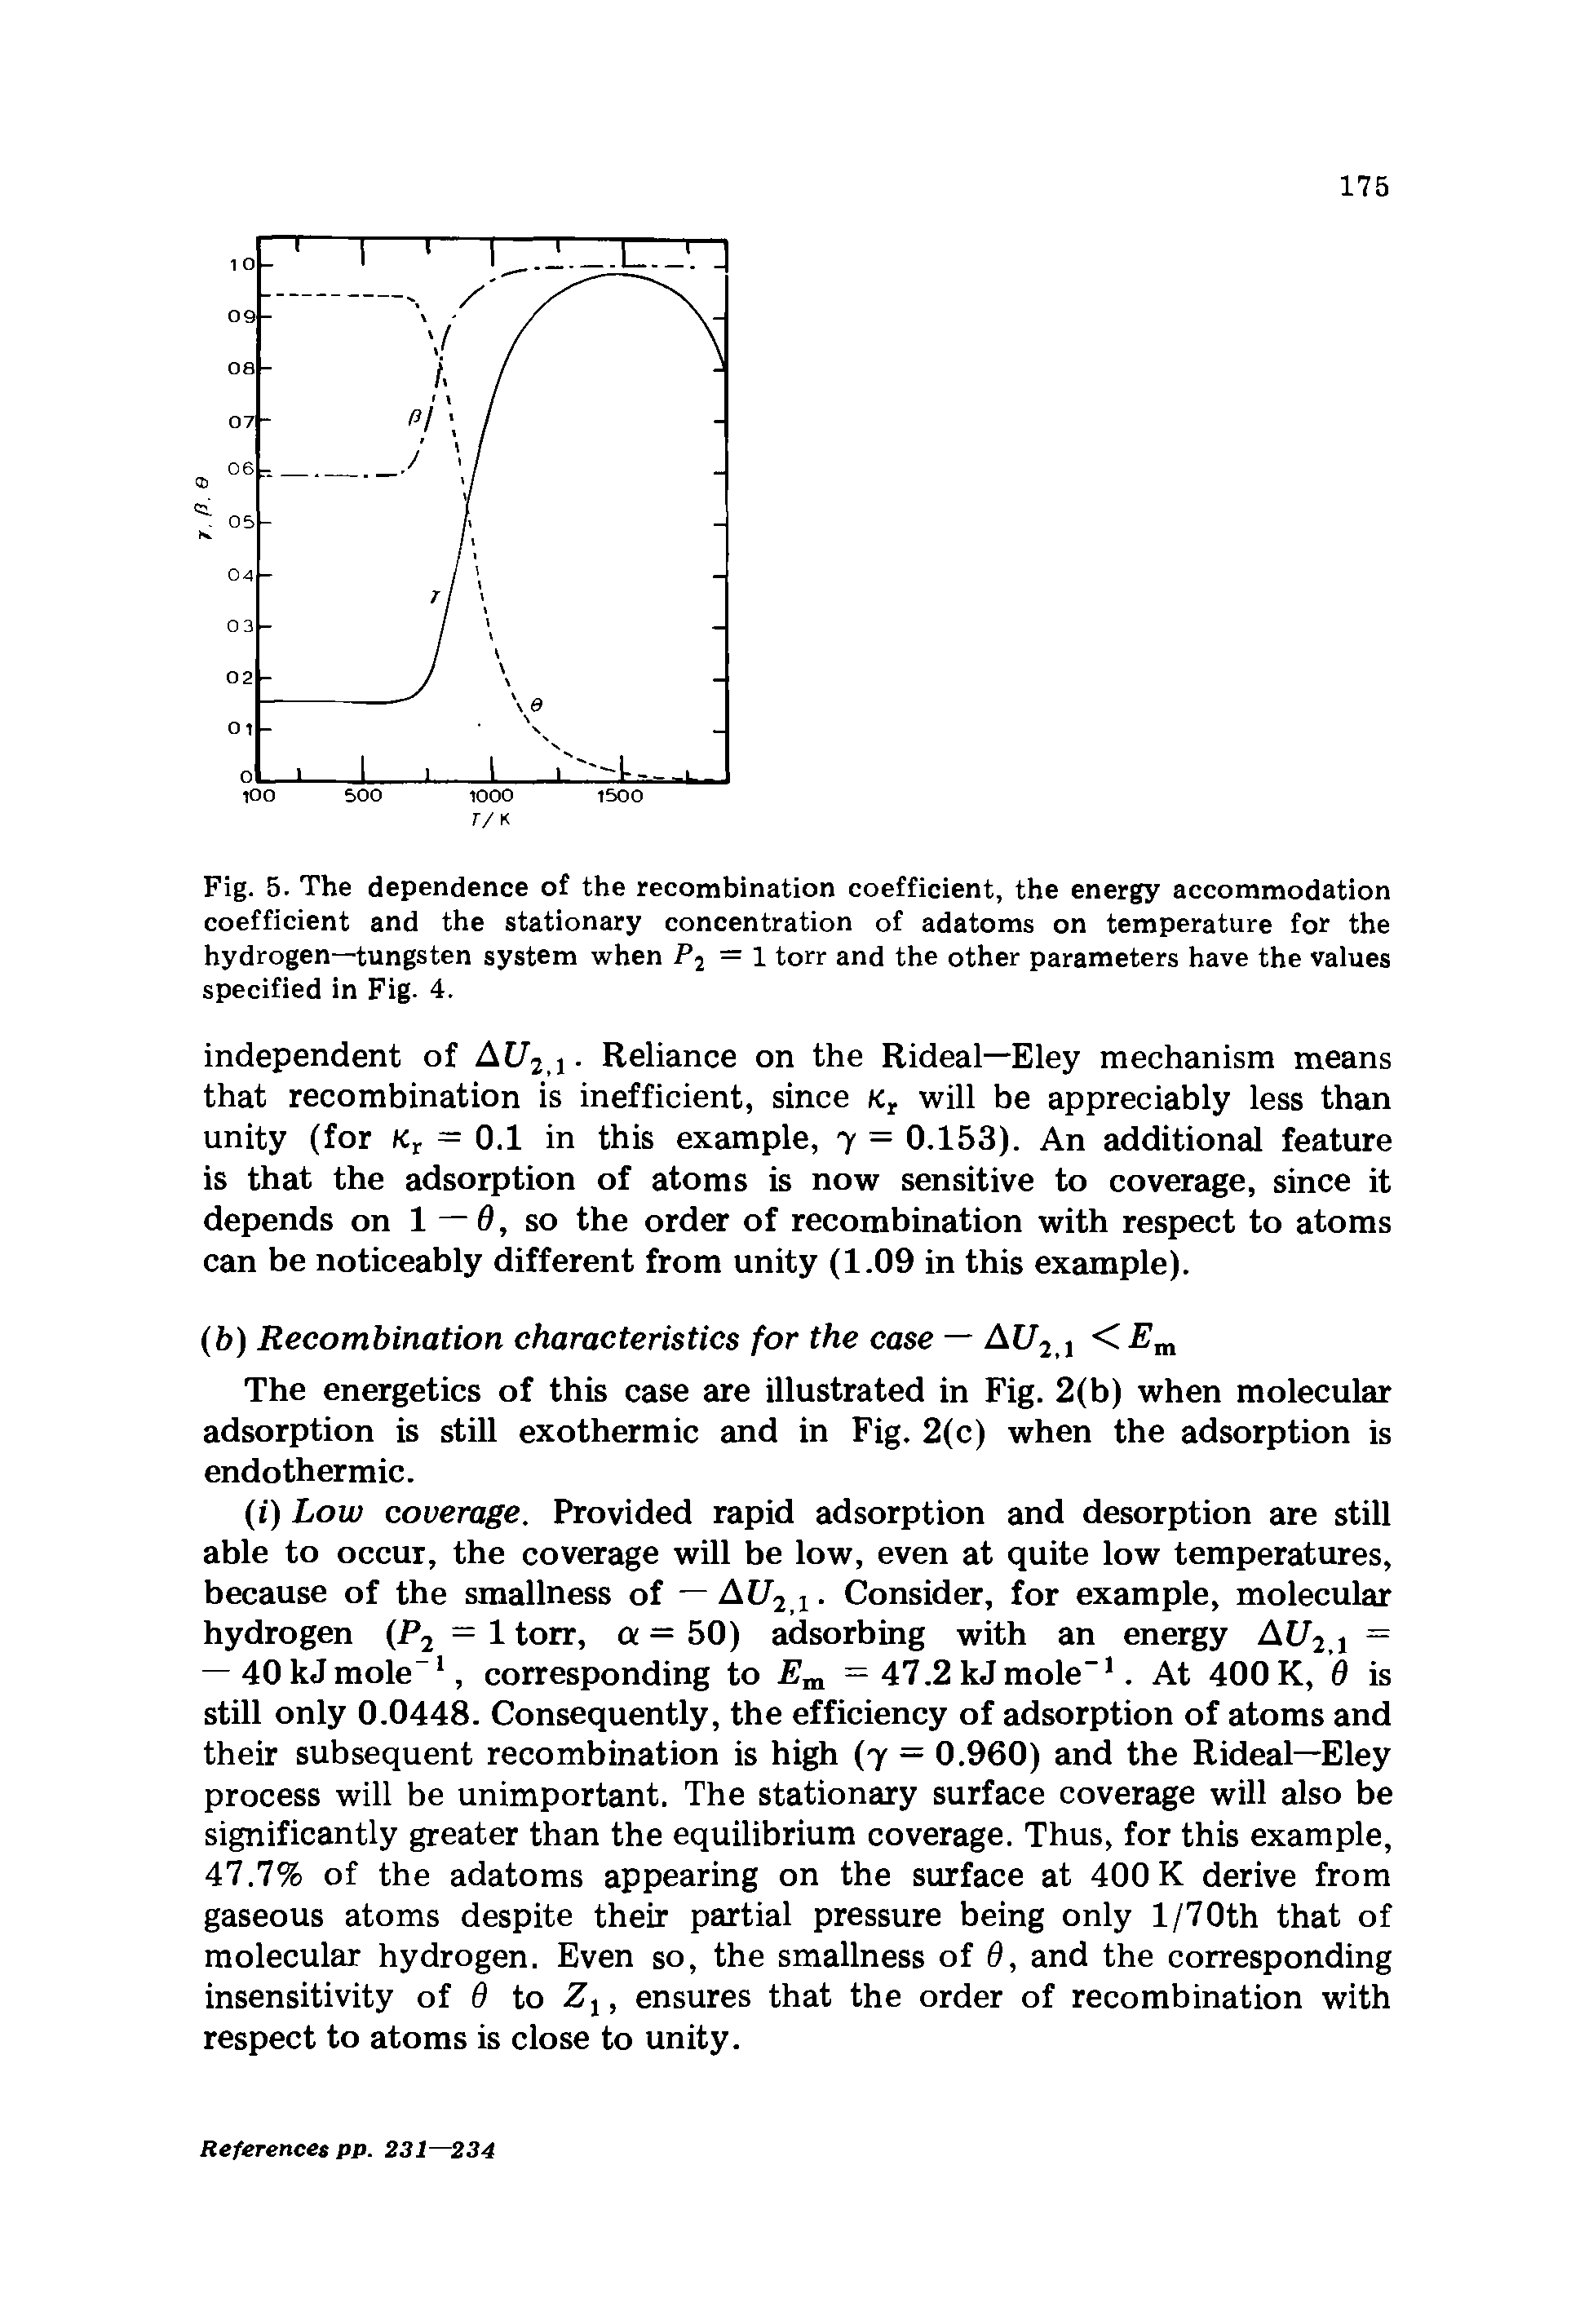 Fig. 5. The dependence of the recombination coefficient, the energy accommodation coefficient and the stationary concentration of adatoms on temperature for the hydrogen—tungsten system when P2 — 1 torr and the other parameters have the values specified in Fig. 4.